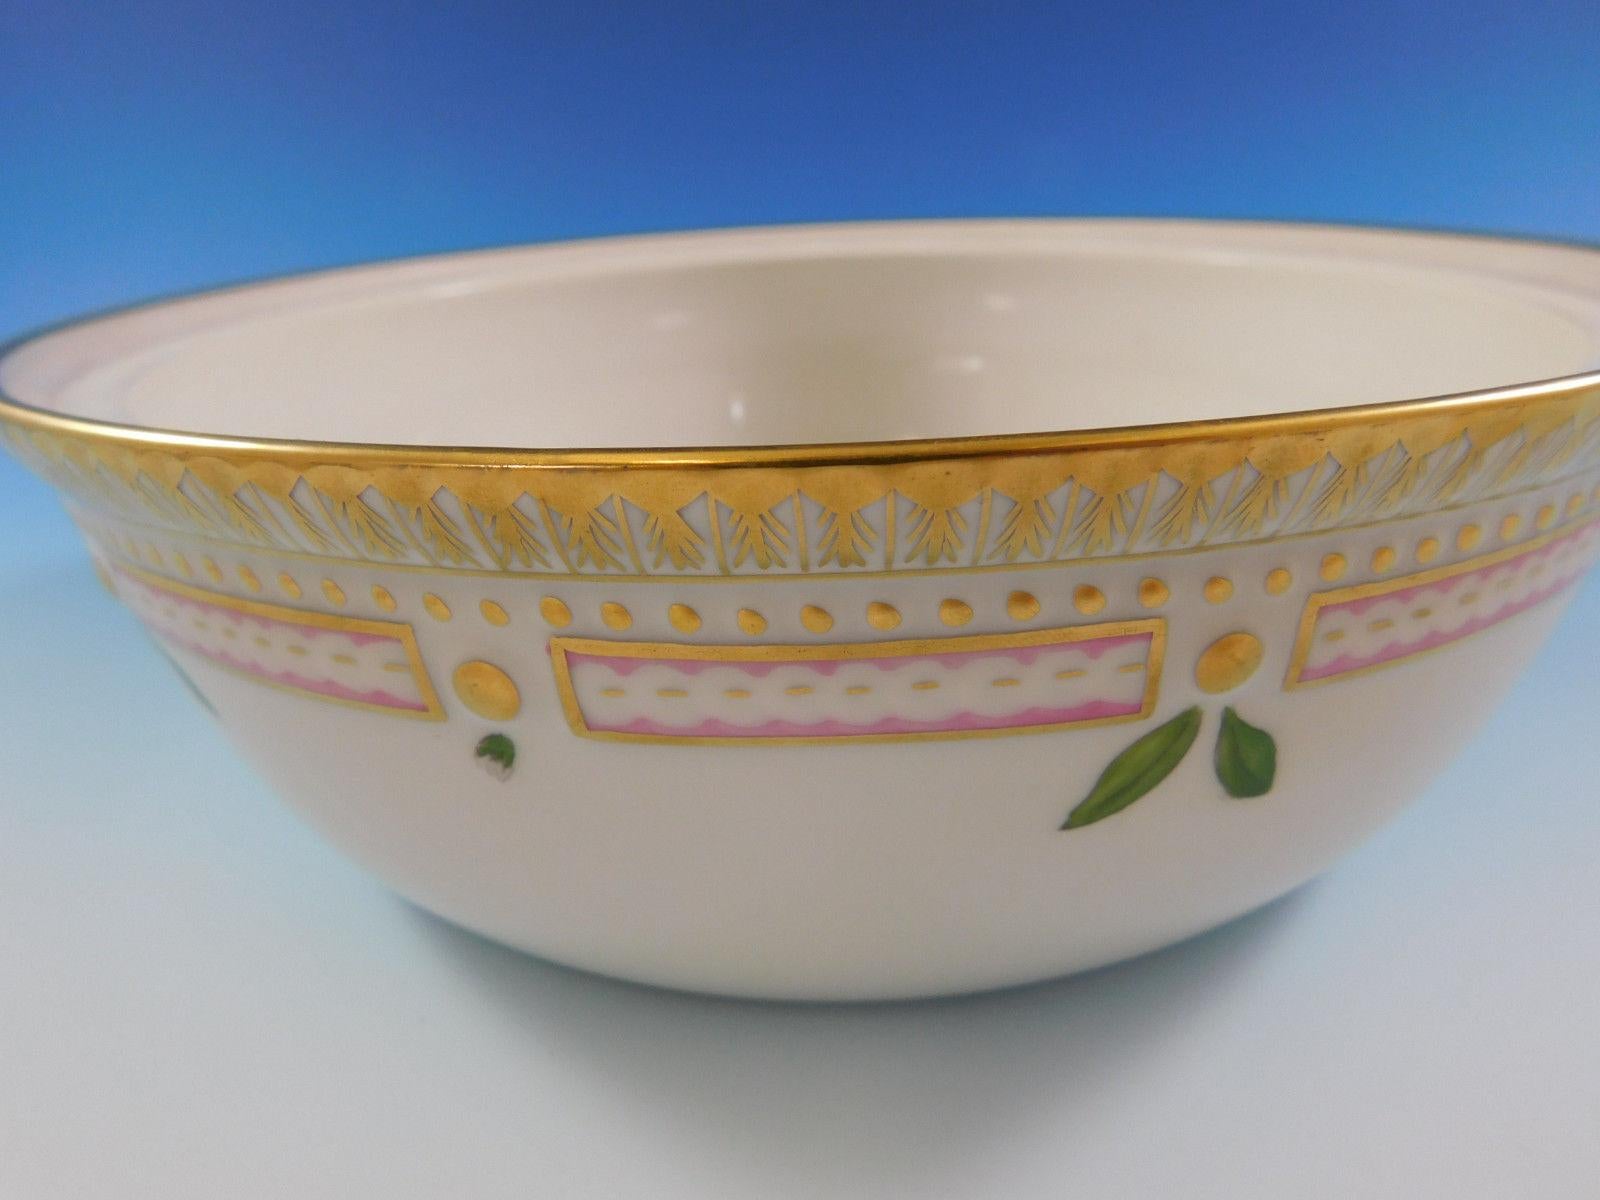 
Flora Danica Porcelian - Covered dish this exceptional estate porcelain round covered vegetable dish has naturalistic yellow flowers on the lid as well as a branch handle with three-dimensional applied flowers. There is a small chip on a petal of